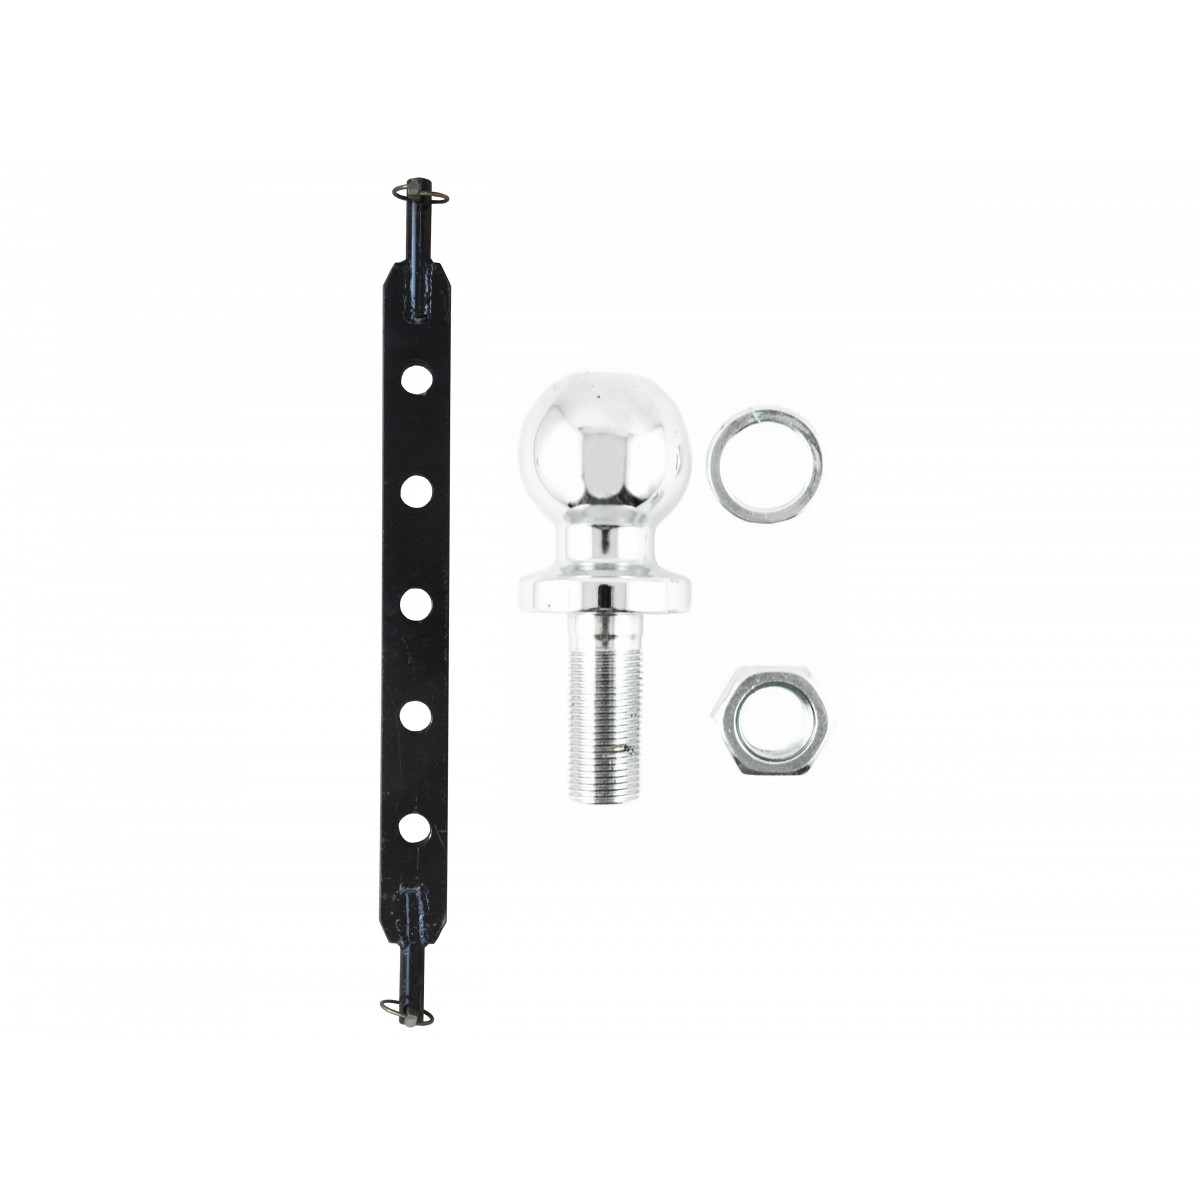 Beam + hitch ball 60 cm KAT 1 universal for three-point linkage